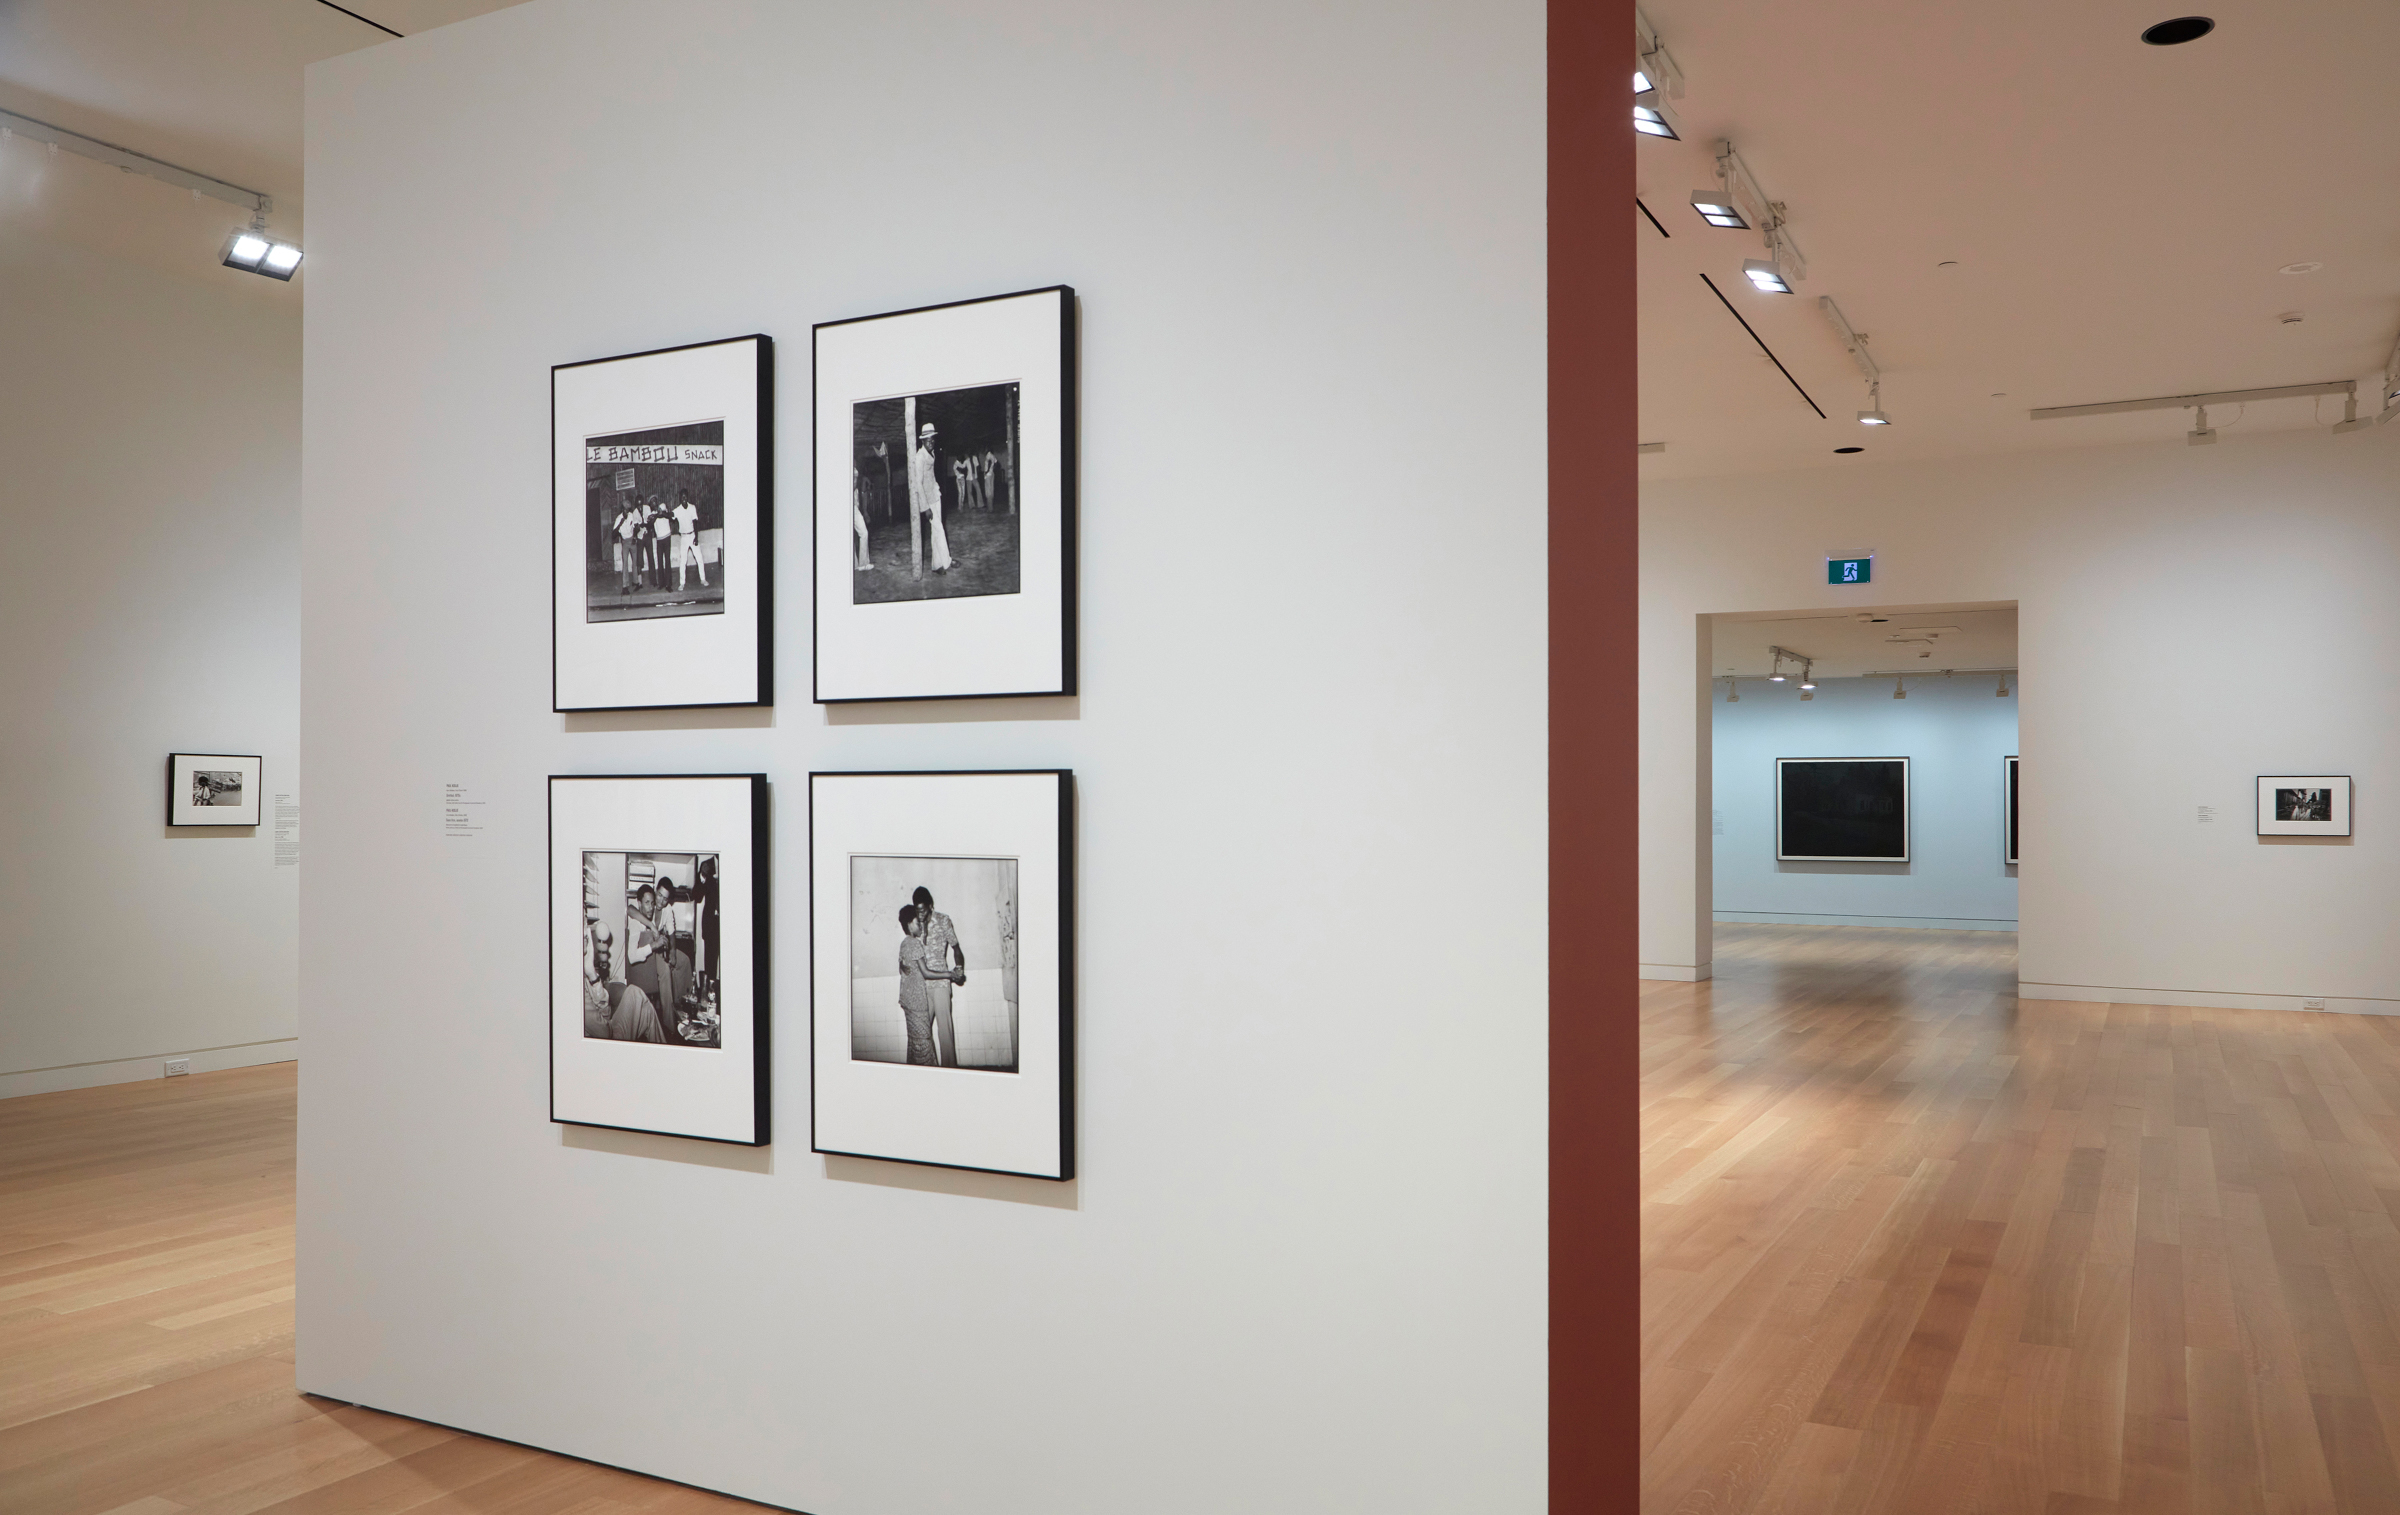     Installation view, Documents, 1960s – 1970s, October 31, 2020 – December 5, 2021. Art Gallery of Ontario. Courtesy of the artists and the Art Gallery of Ontario. Photo © AGO

